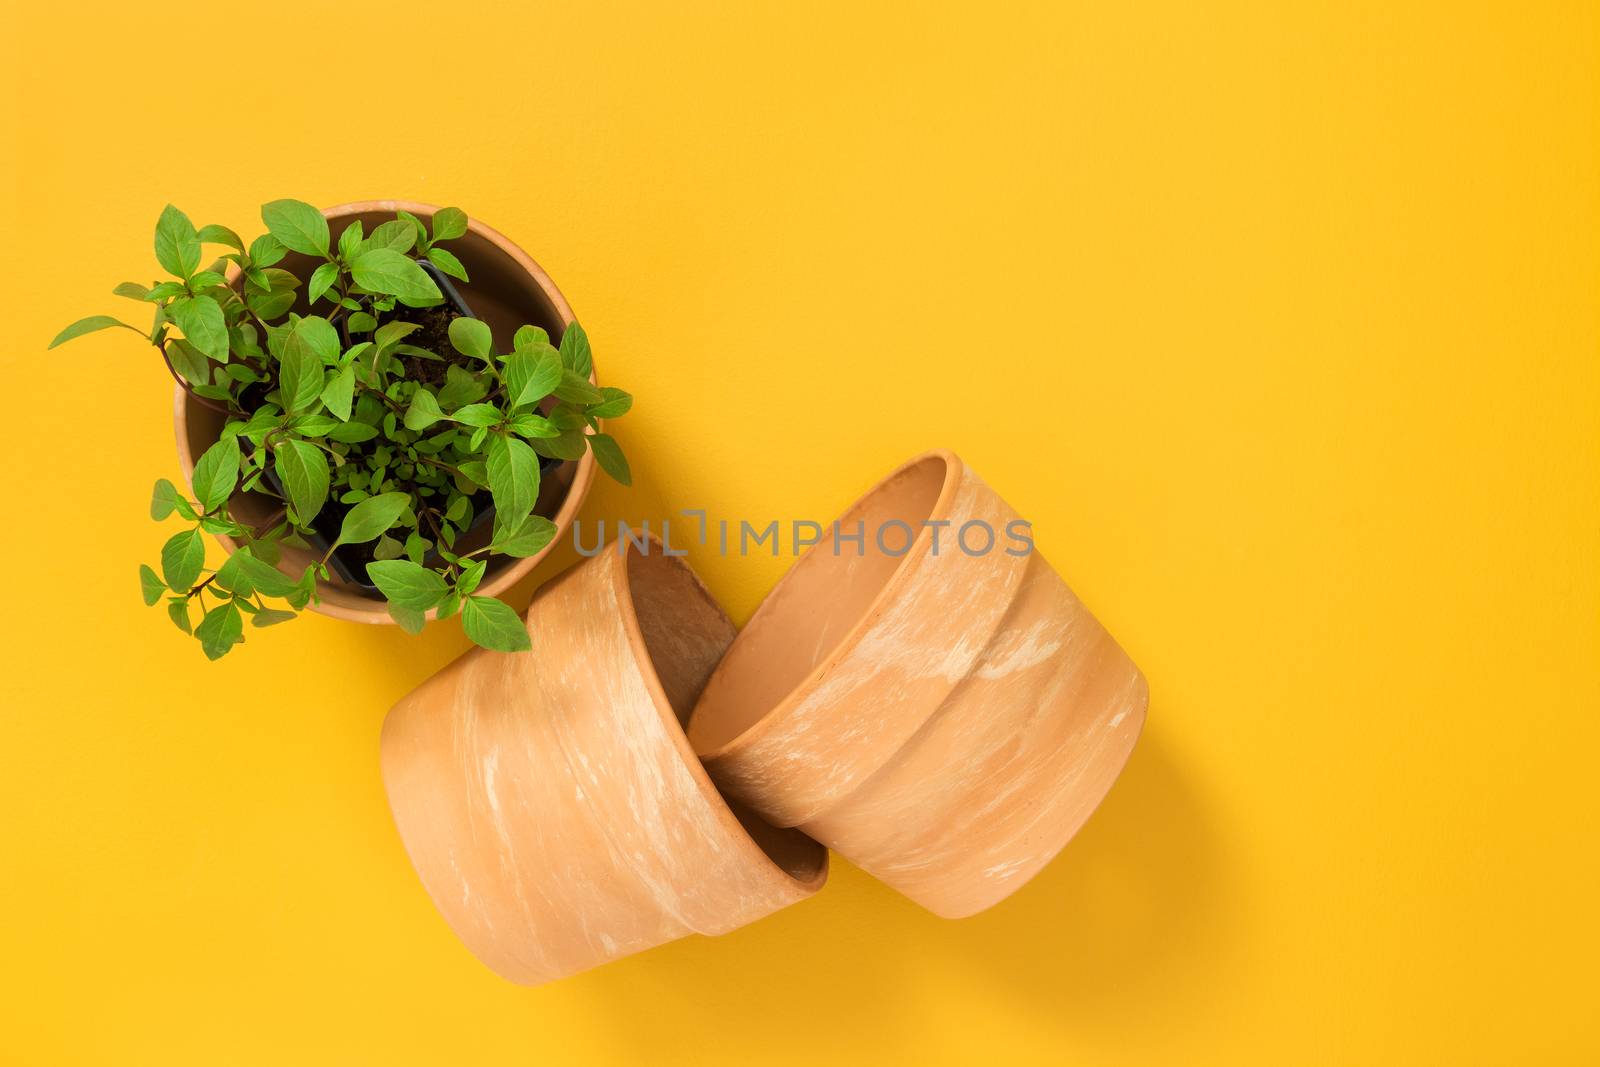 Basil herbs in a clay pot on yellow background by anikasalsera